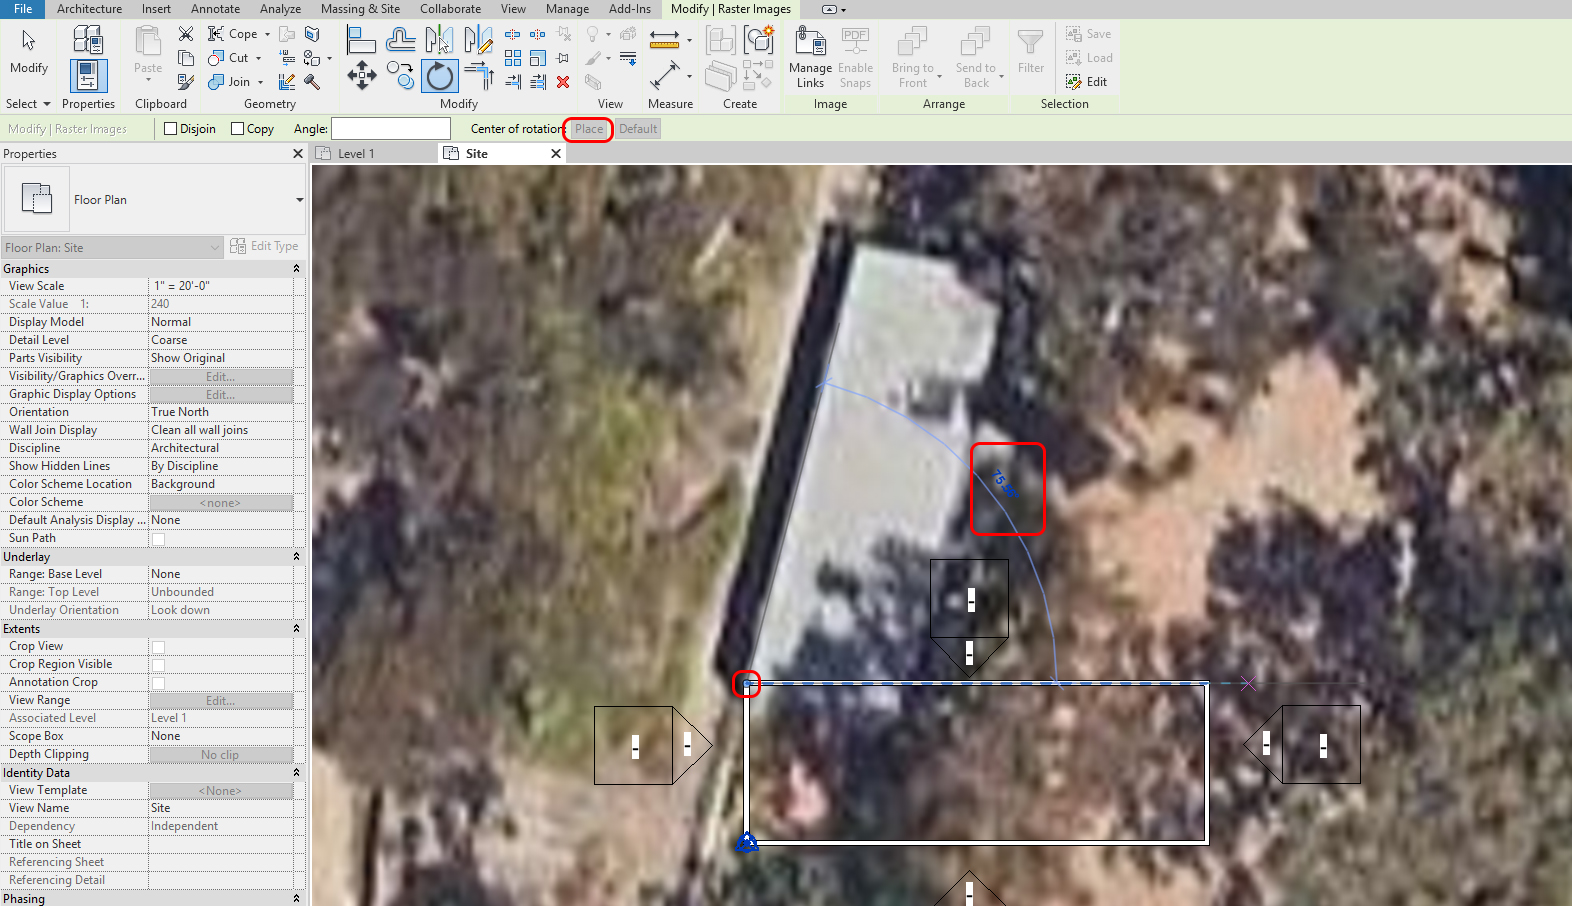 This image indicates how to rotate the google maps to match the building footprint.